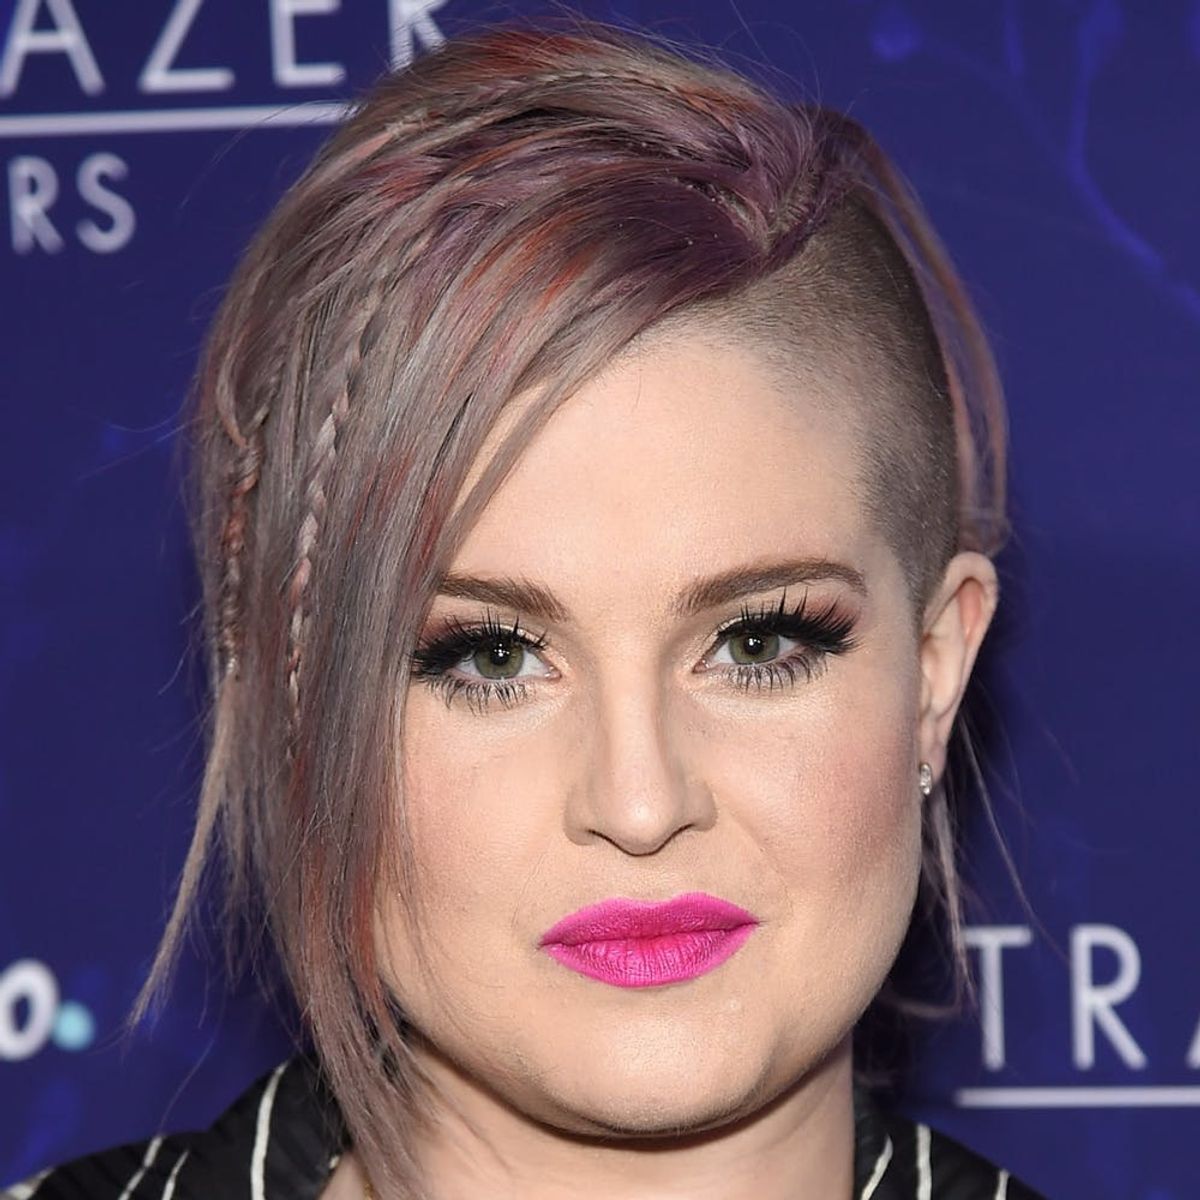 Kelly Osbourne Just Ditched Her Lavender Locks for *This* Jaw-Dropping Shade